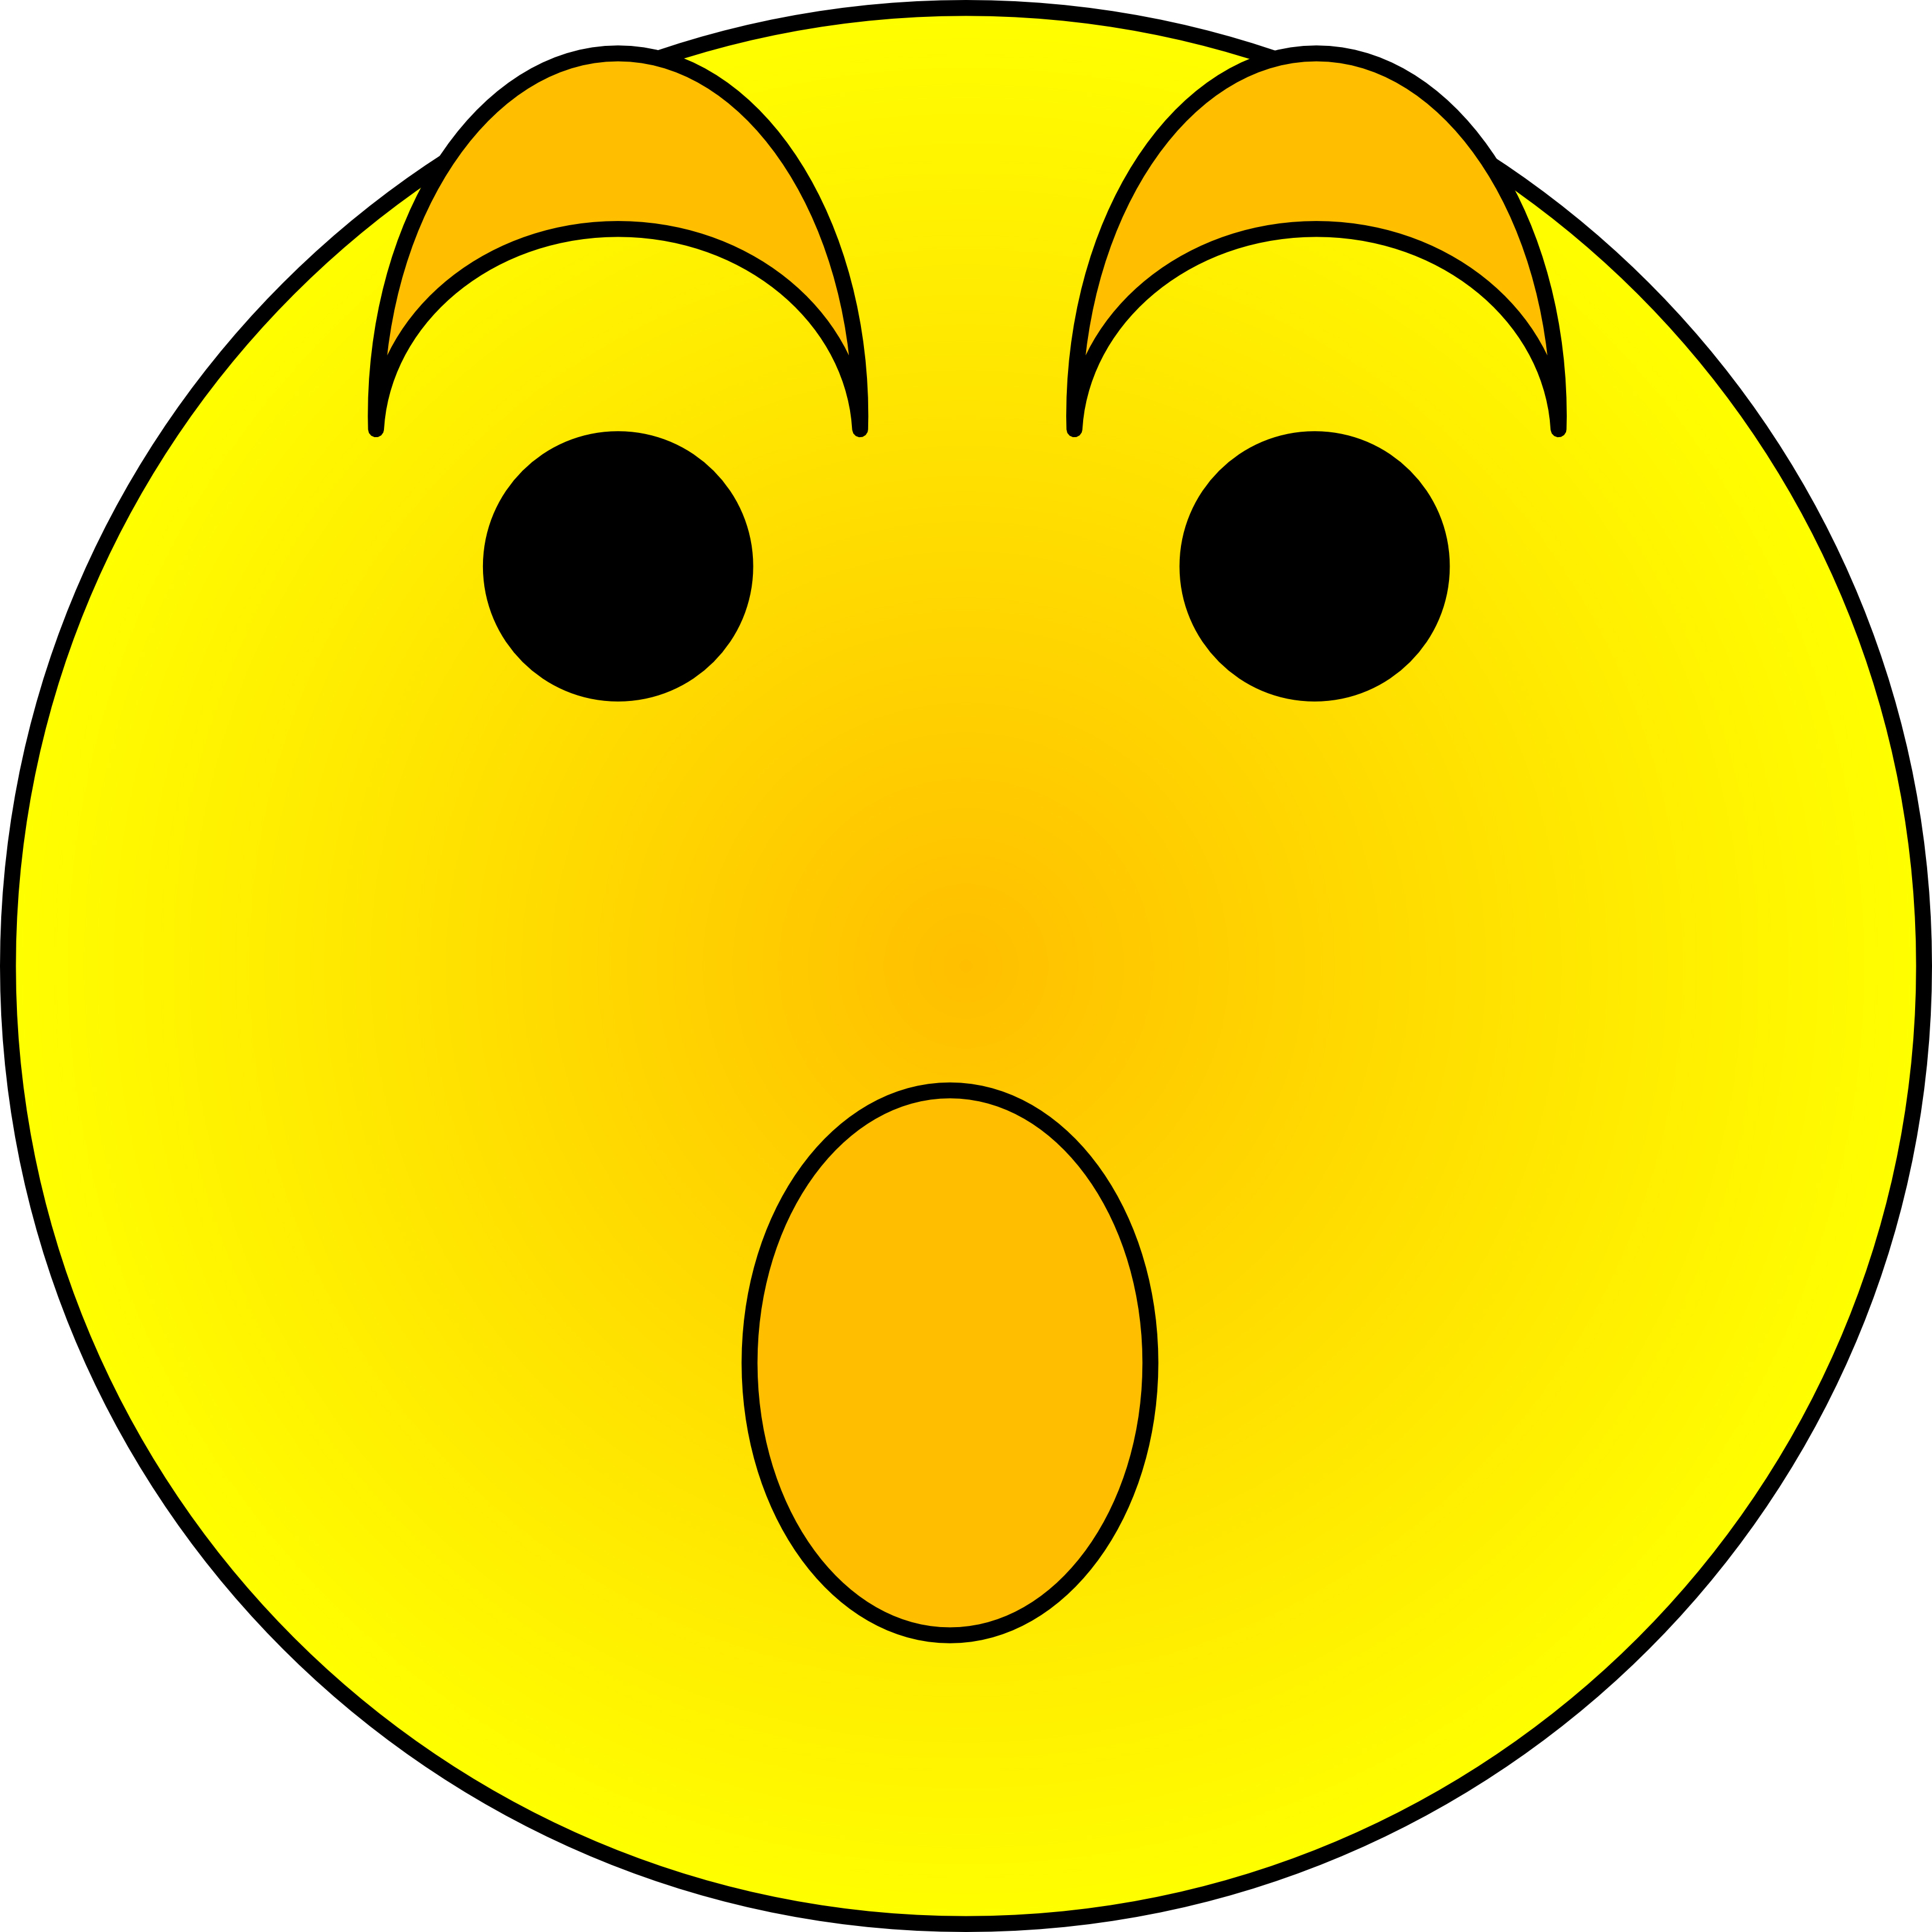 Free Shocked Face Cartoon, Download Free Clip Art, Free Clip.